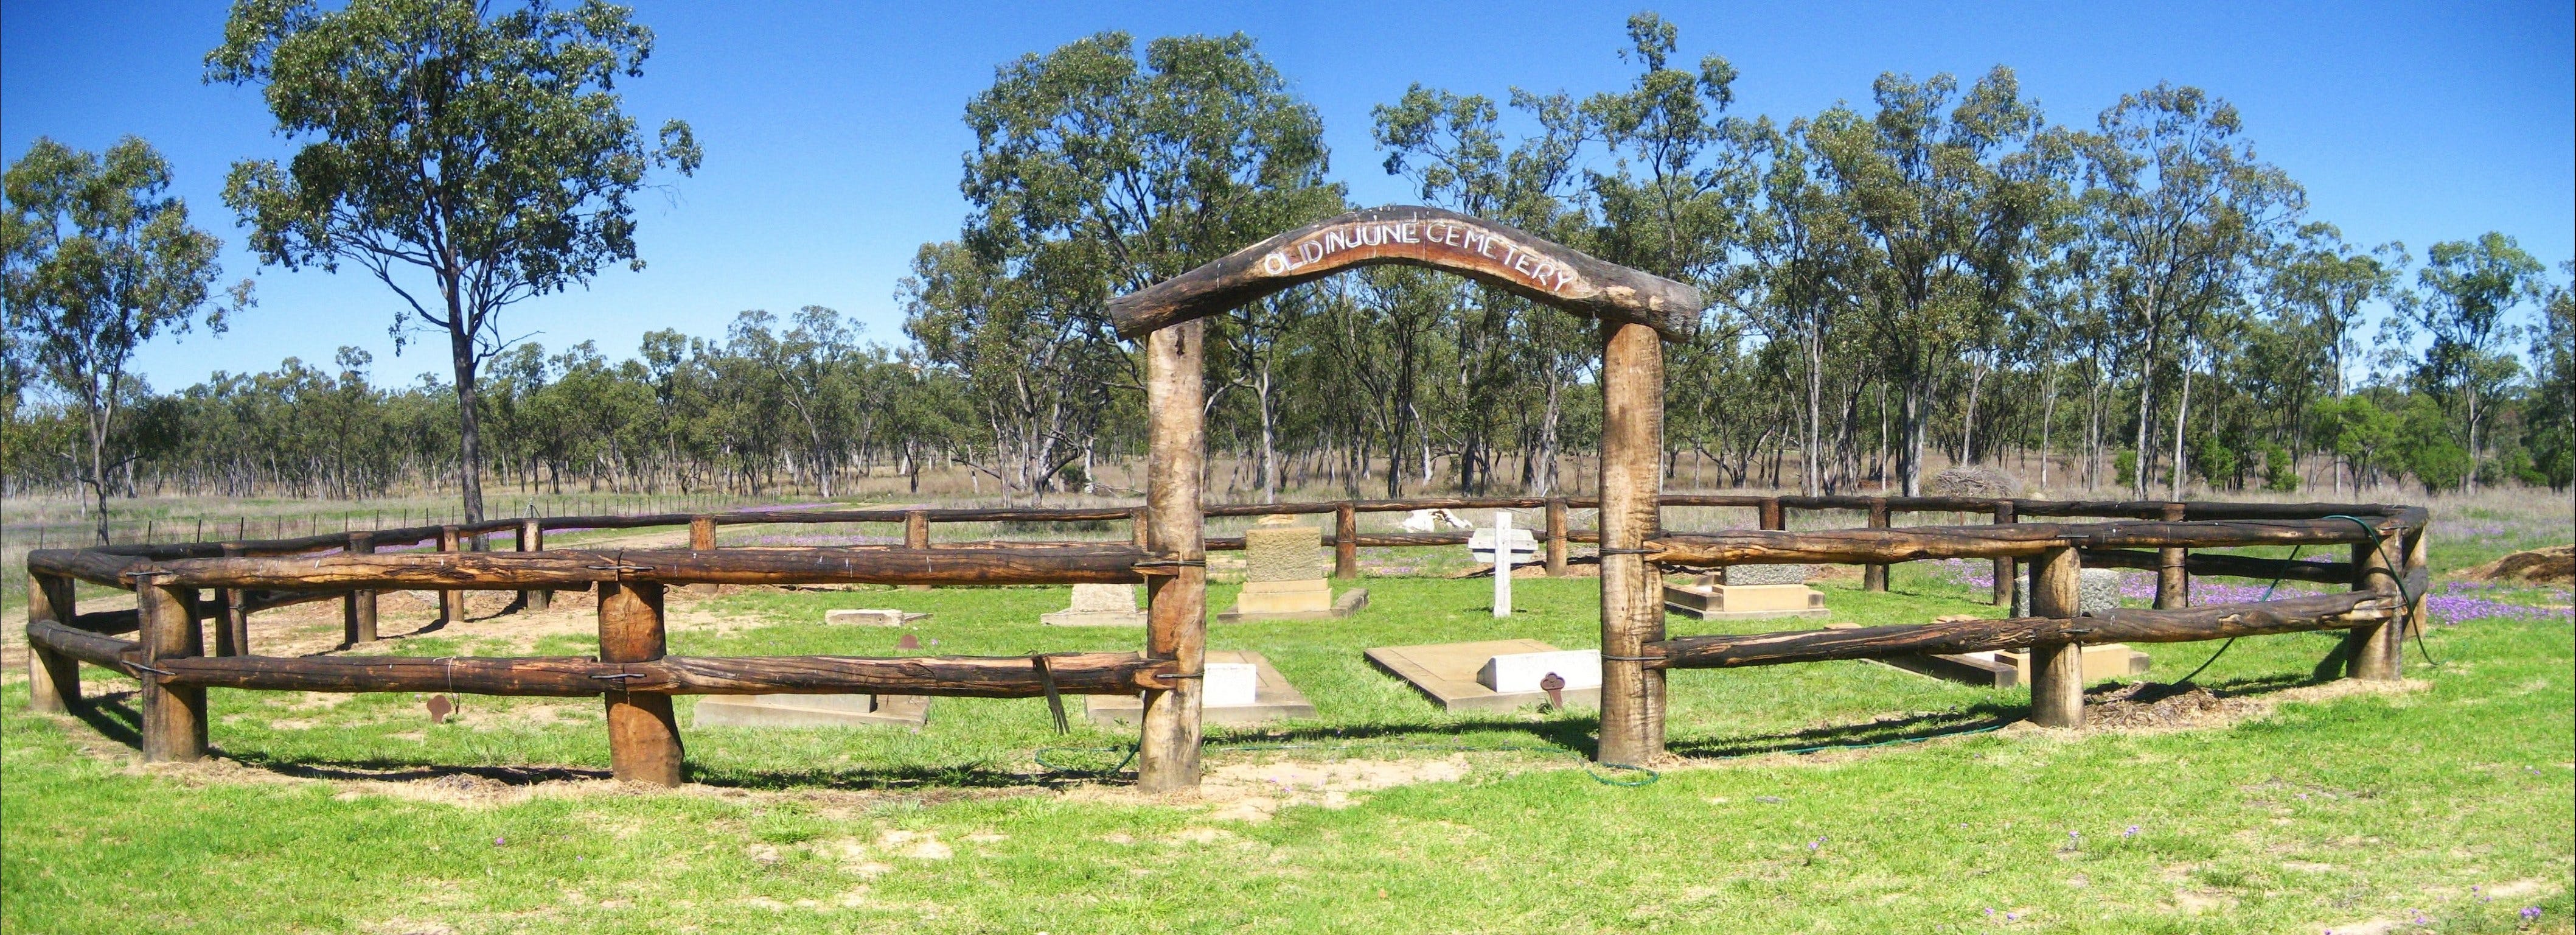 Old Injune Cemetery - Redcliffe Tourism